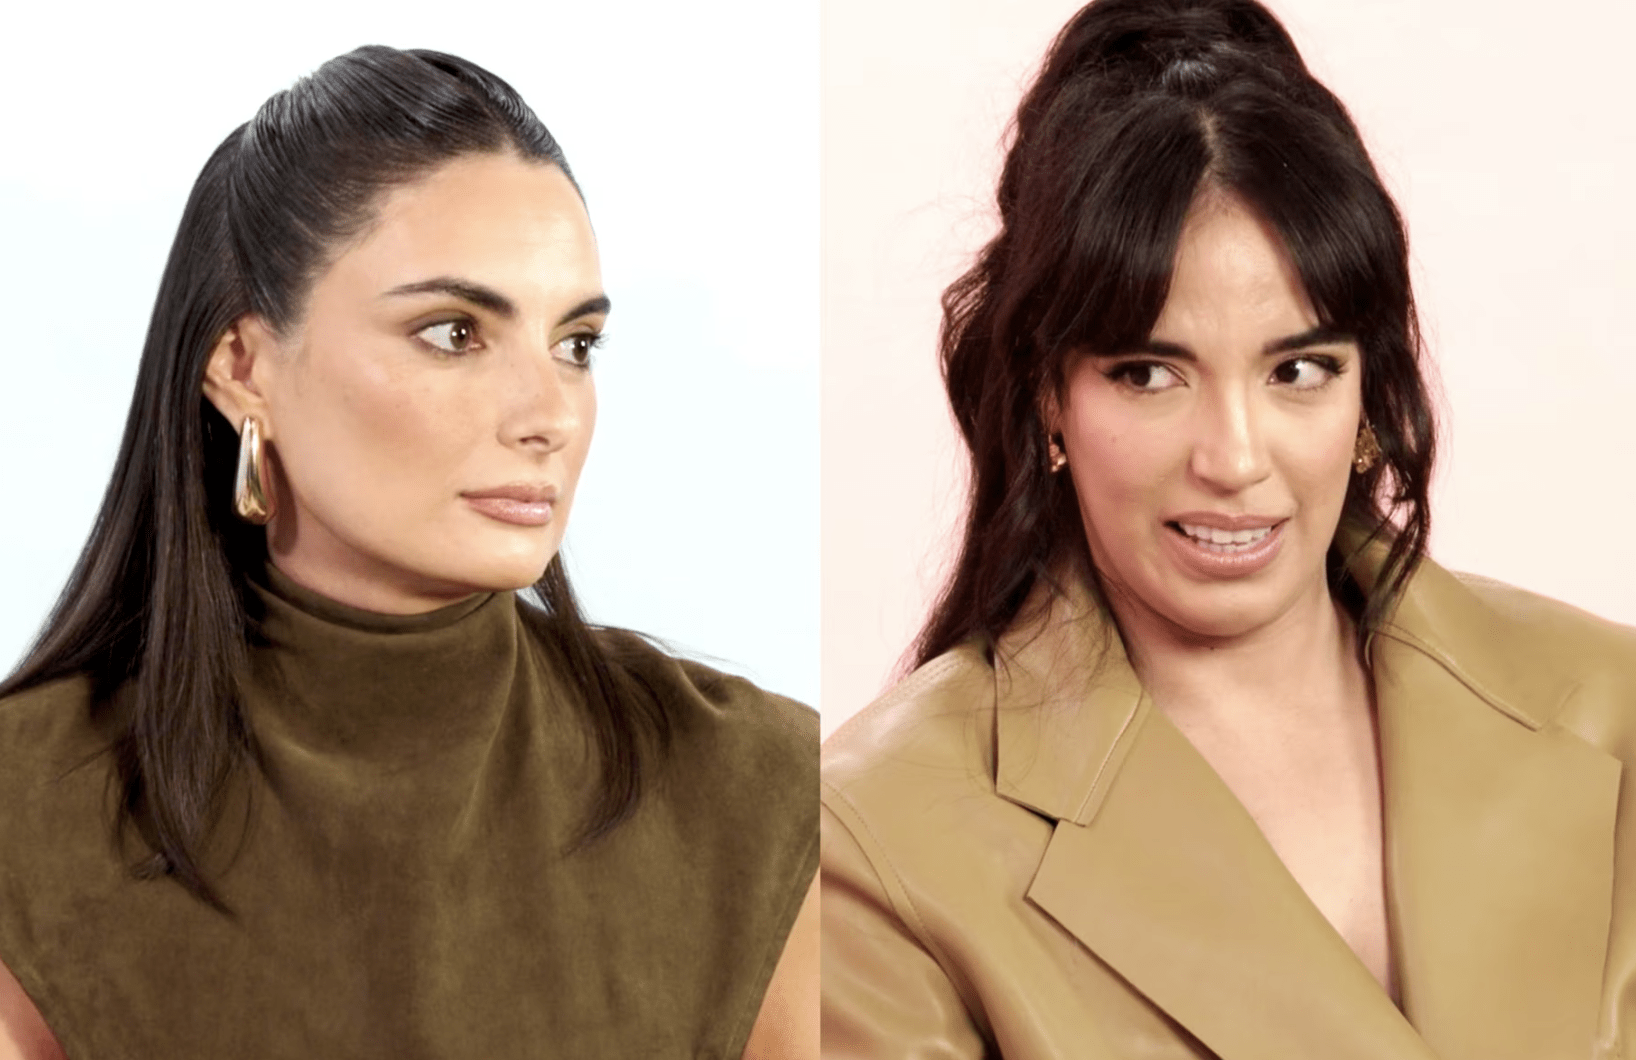 Jesse Solomon Highlights Tension Between Paige DeSorbo and Danielle Olivera at ‘Summer House’ Season 8 Reunion